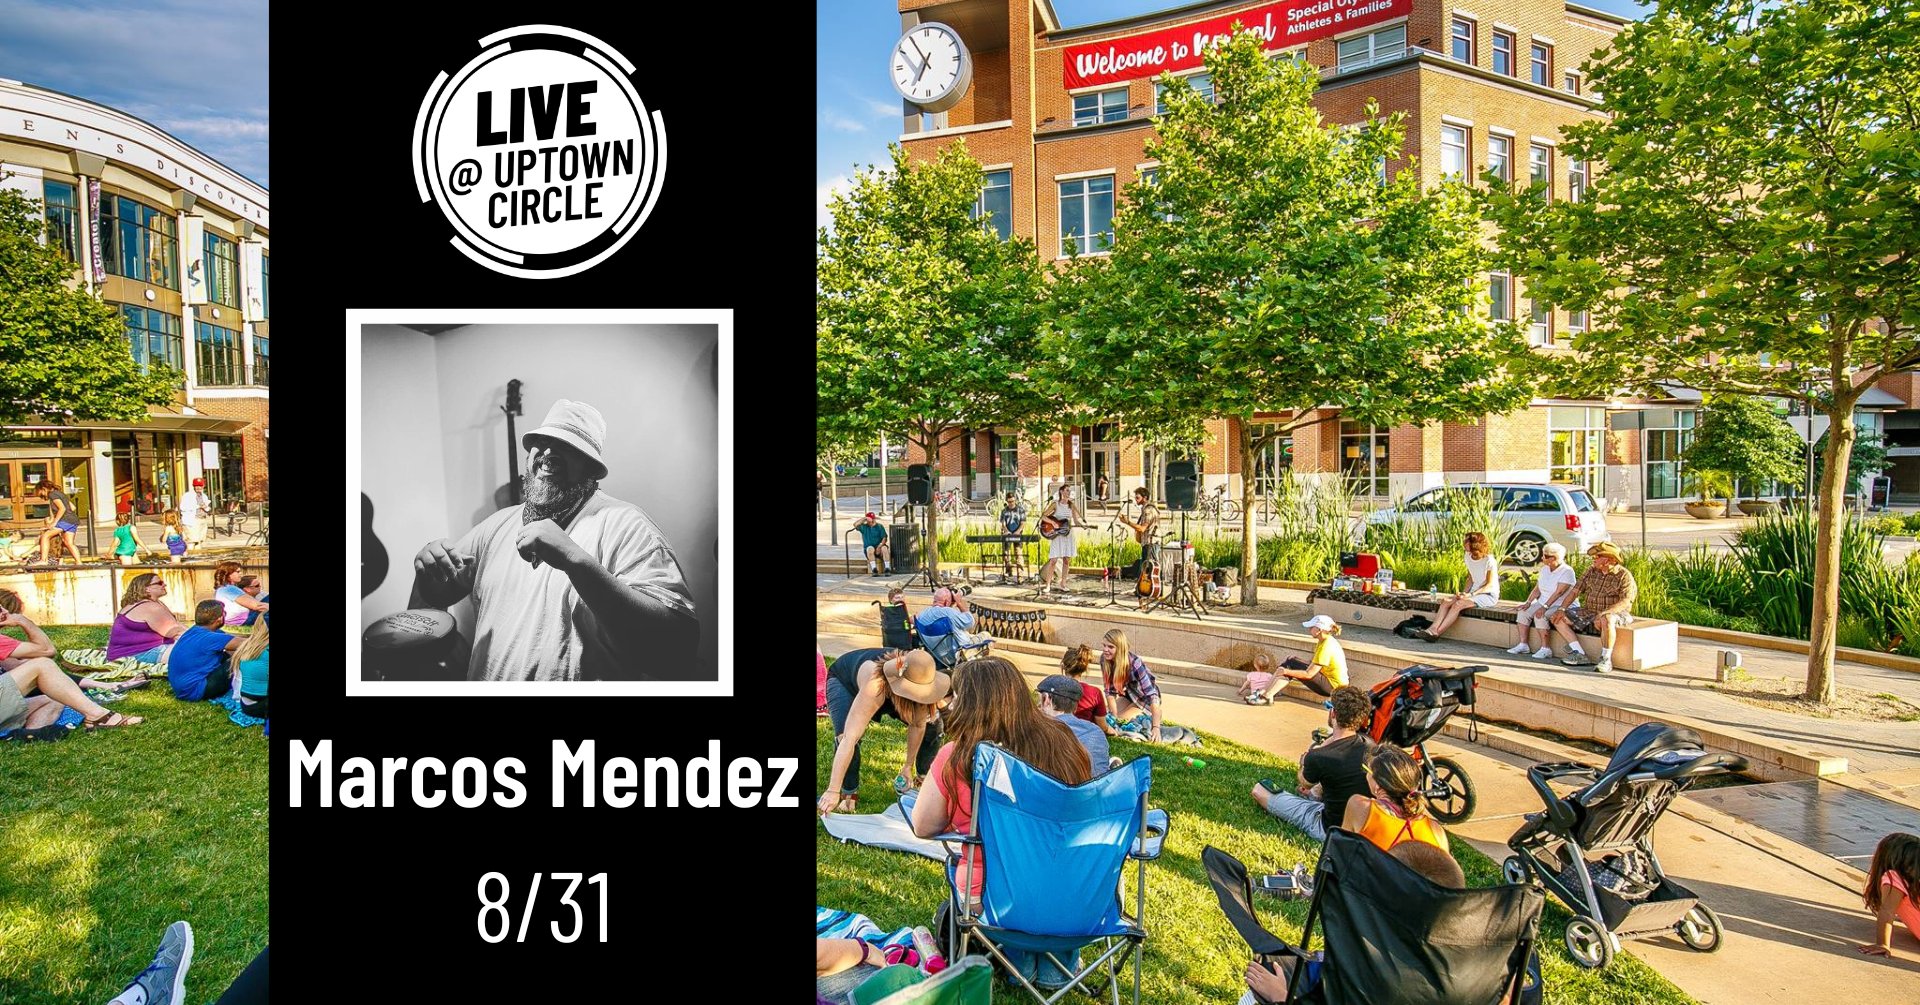 Normal LIVE presents Marcos Mendez @ Uptown Circle